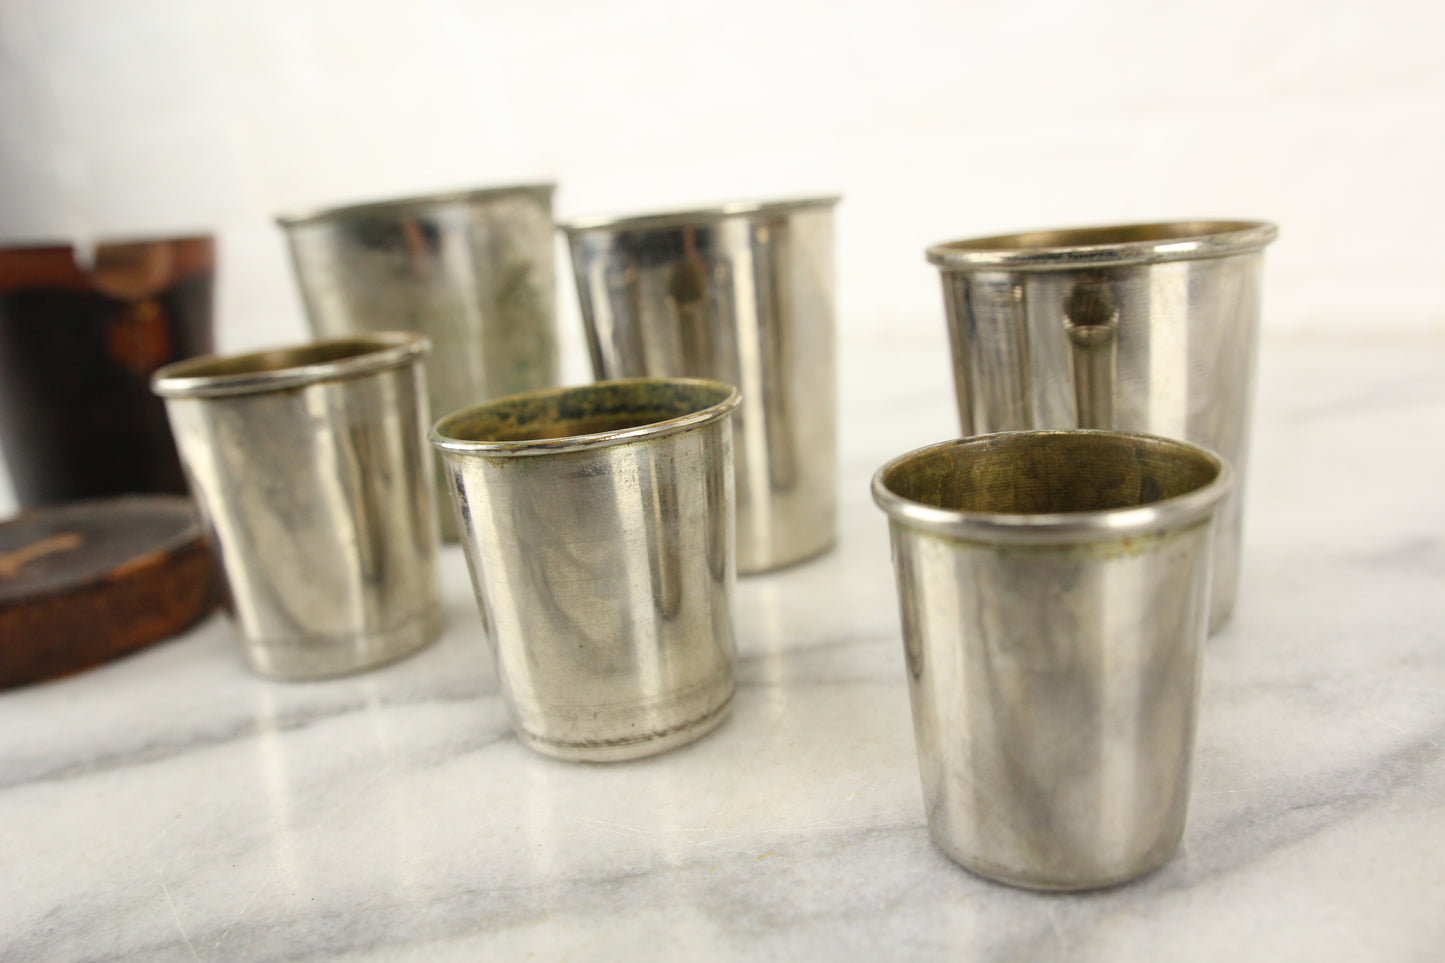 Graduated 6 Piece Metal Nesting Cup Set in Leather Case